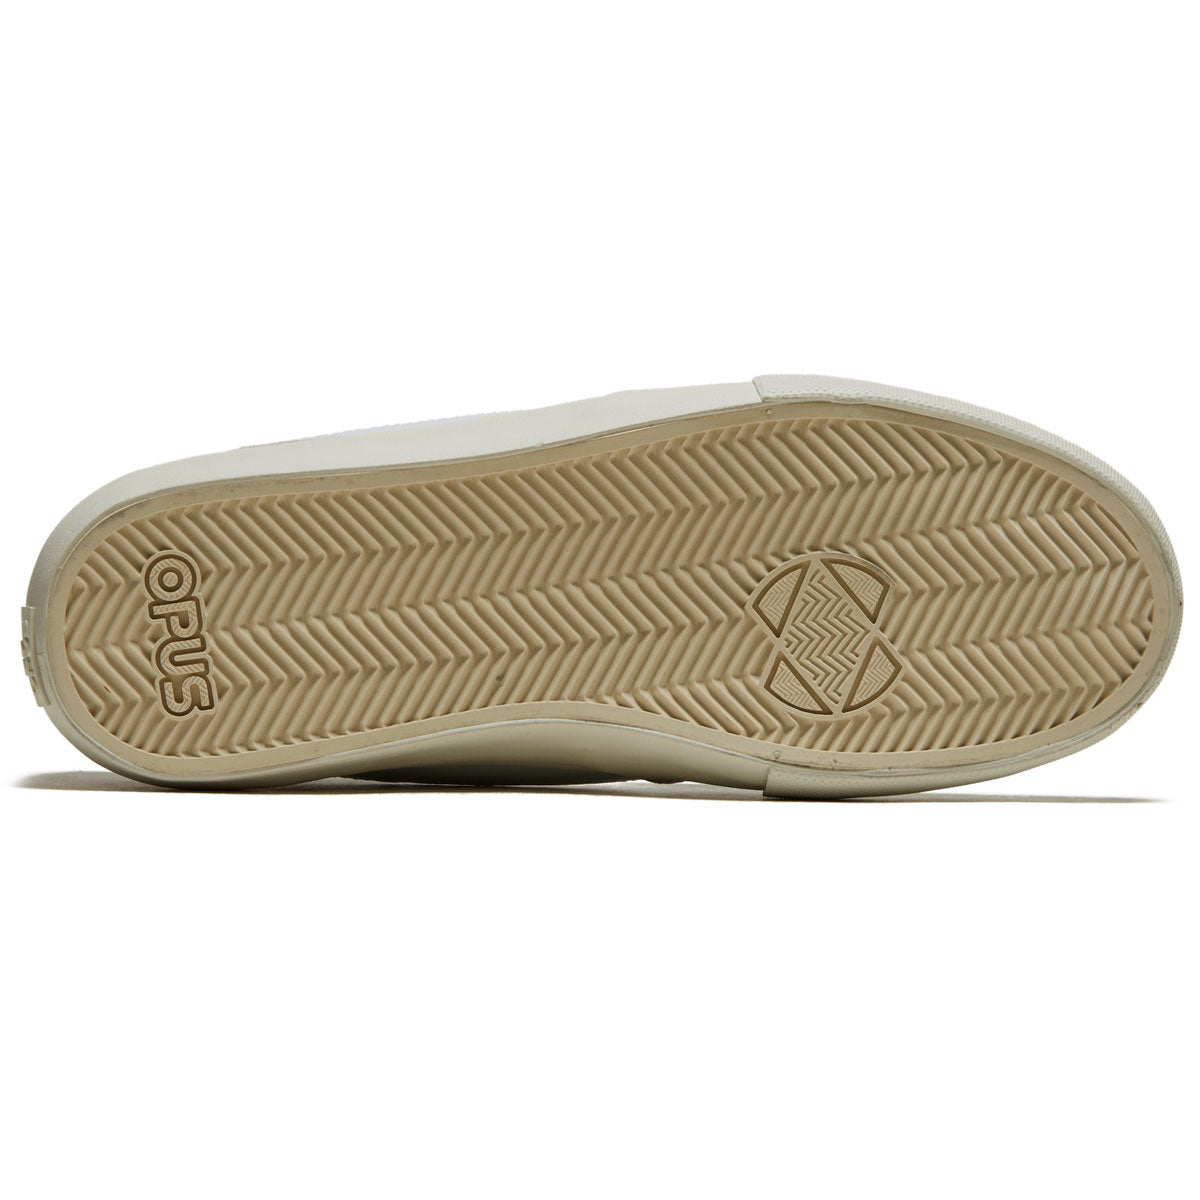 Opus Standard Low Shoes - Off White/Cream image 4